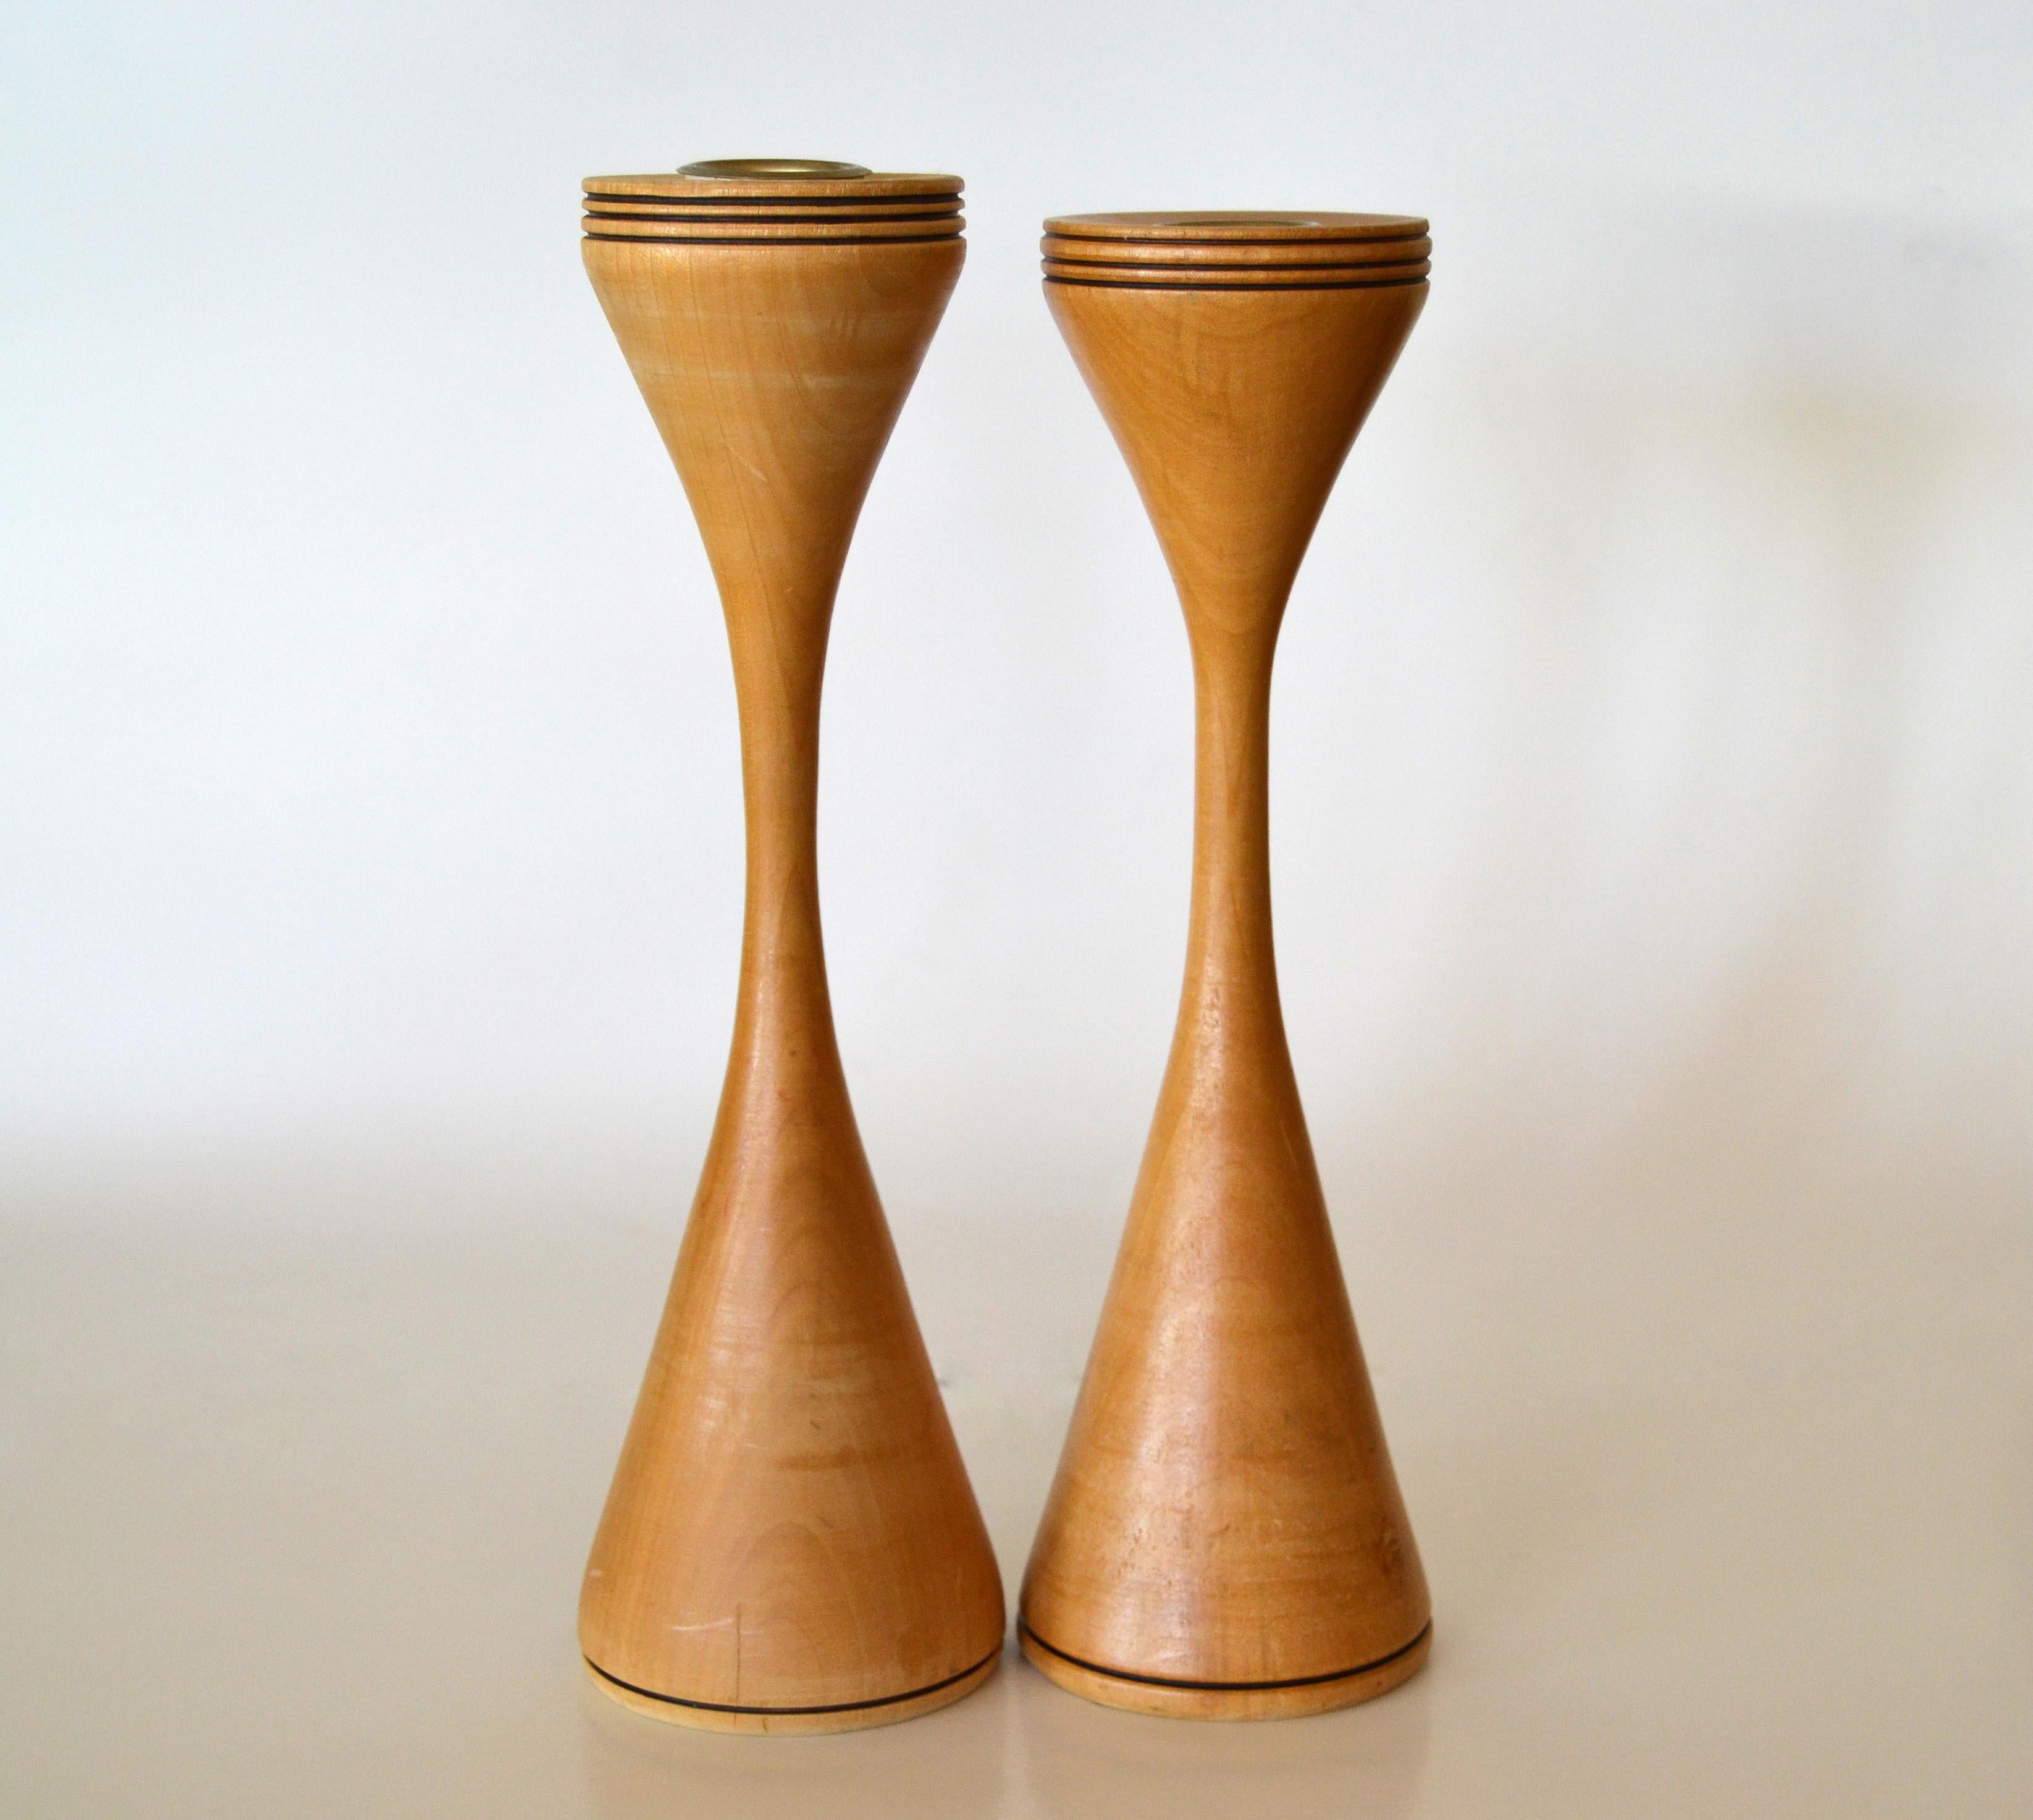 Signed Scandinavian Modern Handcrafted Turned Wood and Brass Candleholders, Pair For Sale 3